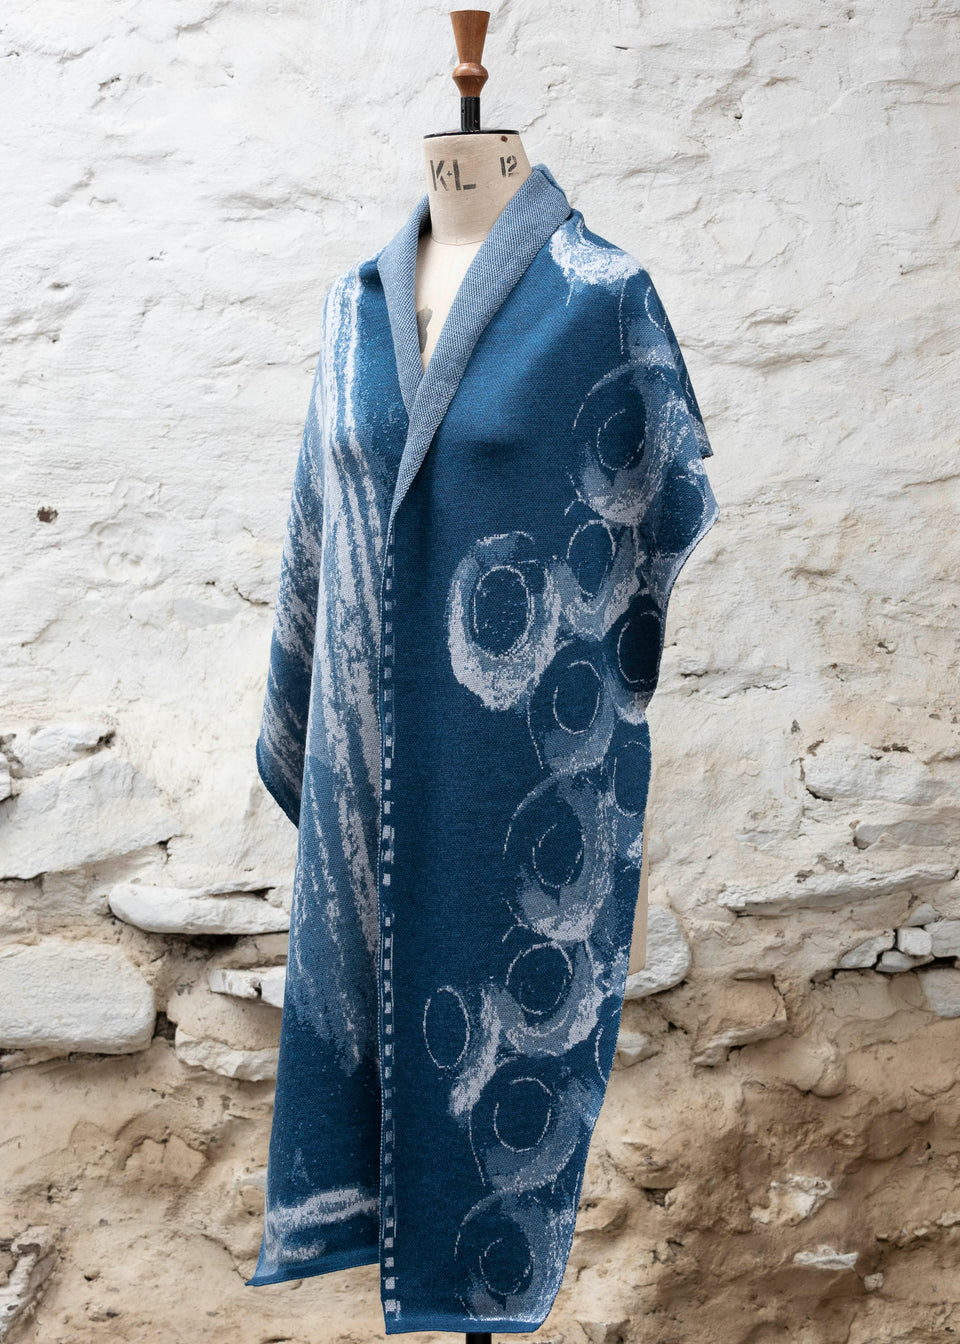 Finely knitted shawl in luxurious merino, made in Scotland. Shown on a vintage mannequin against a whitewashed wall. Abstract design in sea blues with curvilinear motifs. Draped to show full wrap from the side